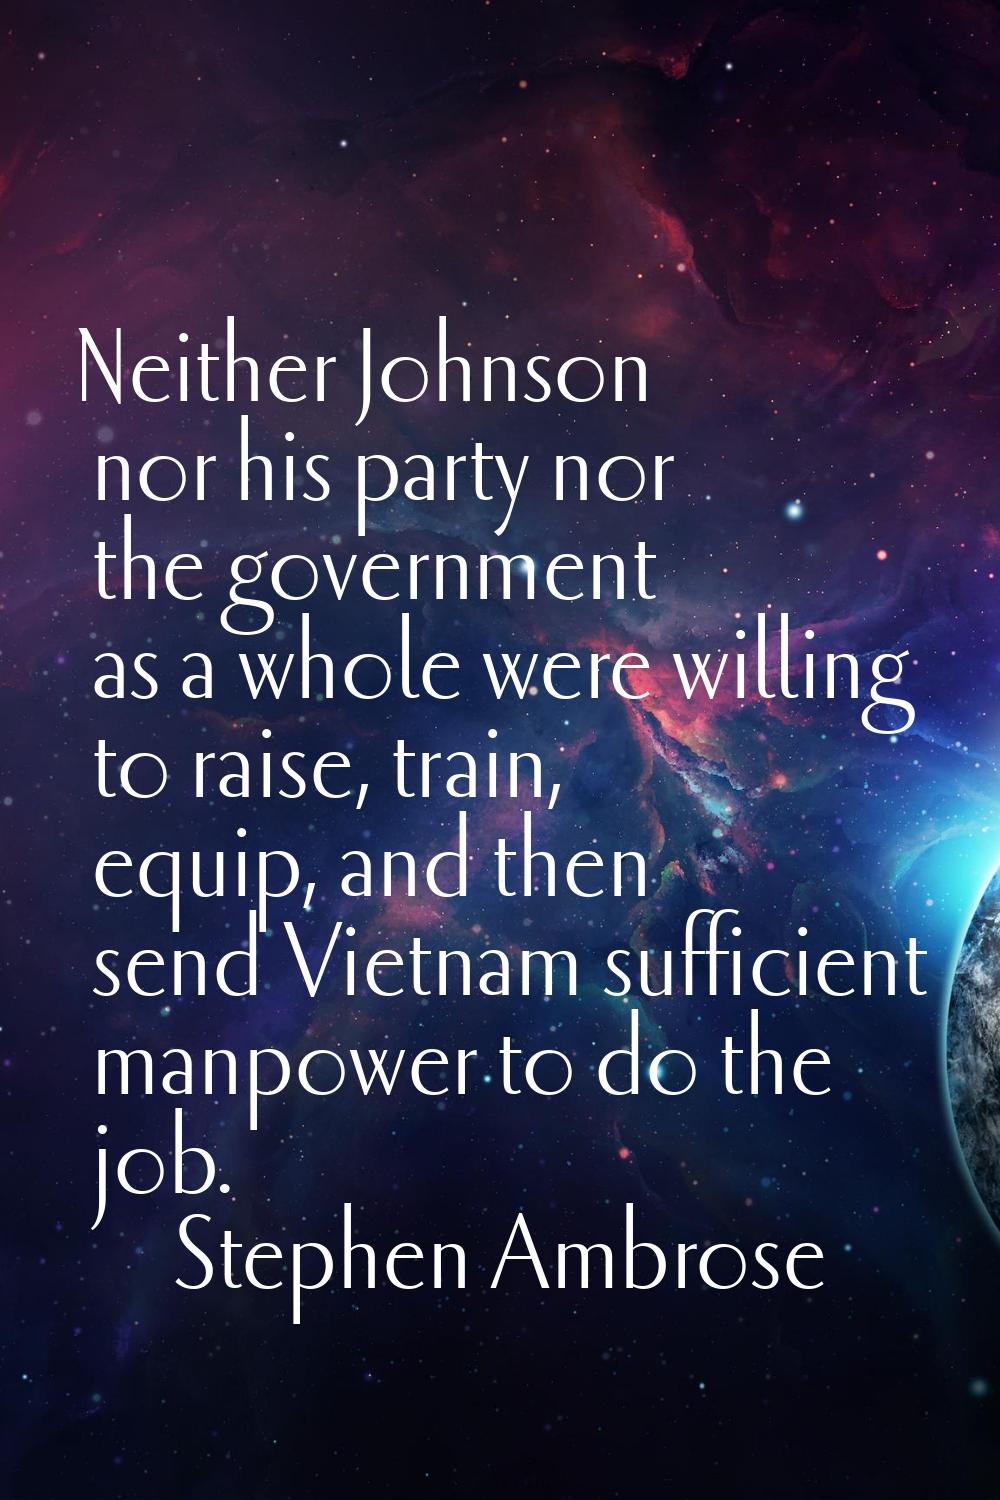 Neither Johnson nor his party nor the government as a whole were willing to raise, train, equip, an